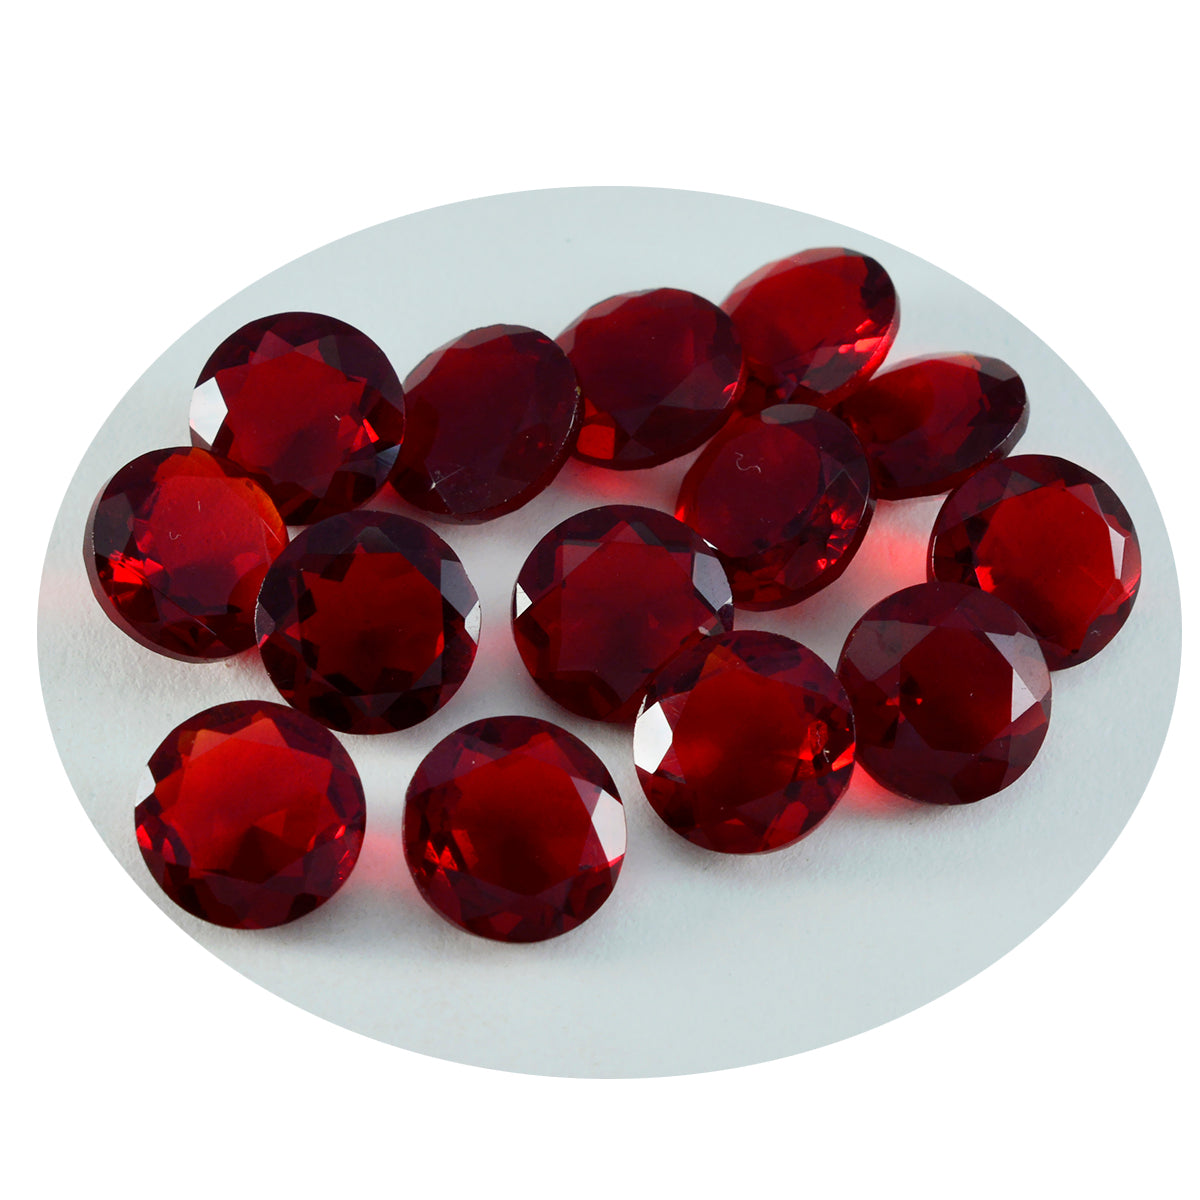 Riyogems 1PC Red Ruby CZ Faceted 8x8 mm Round Shape beautiful Quality Loose Stone